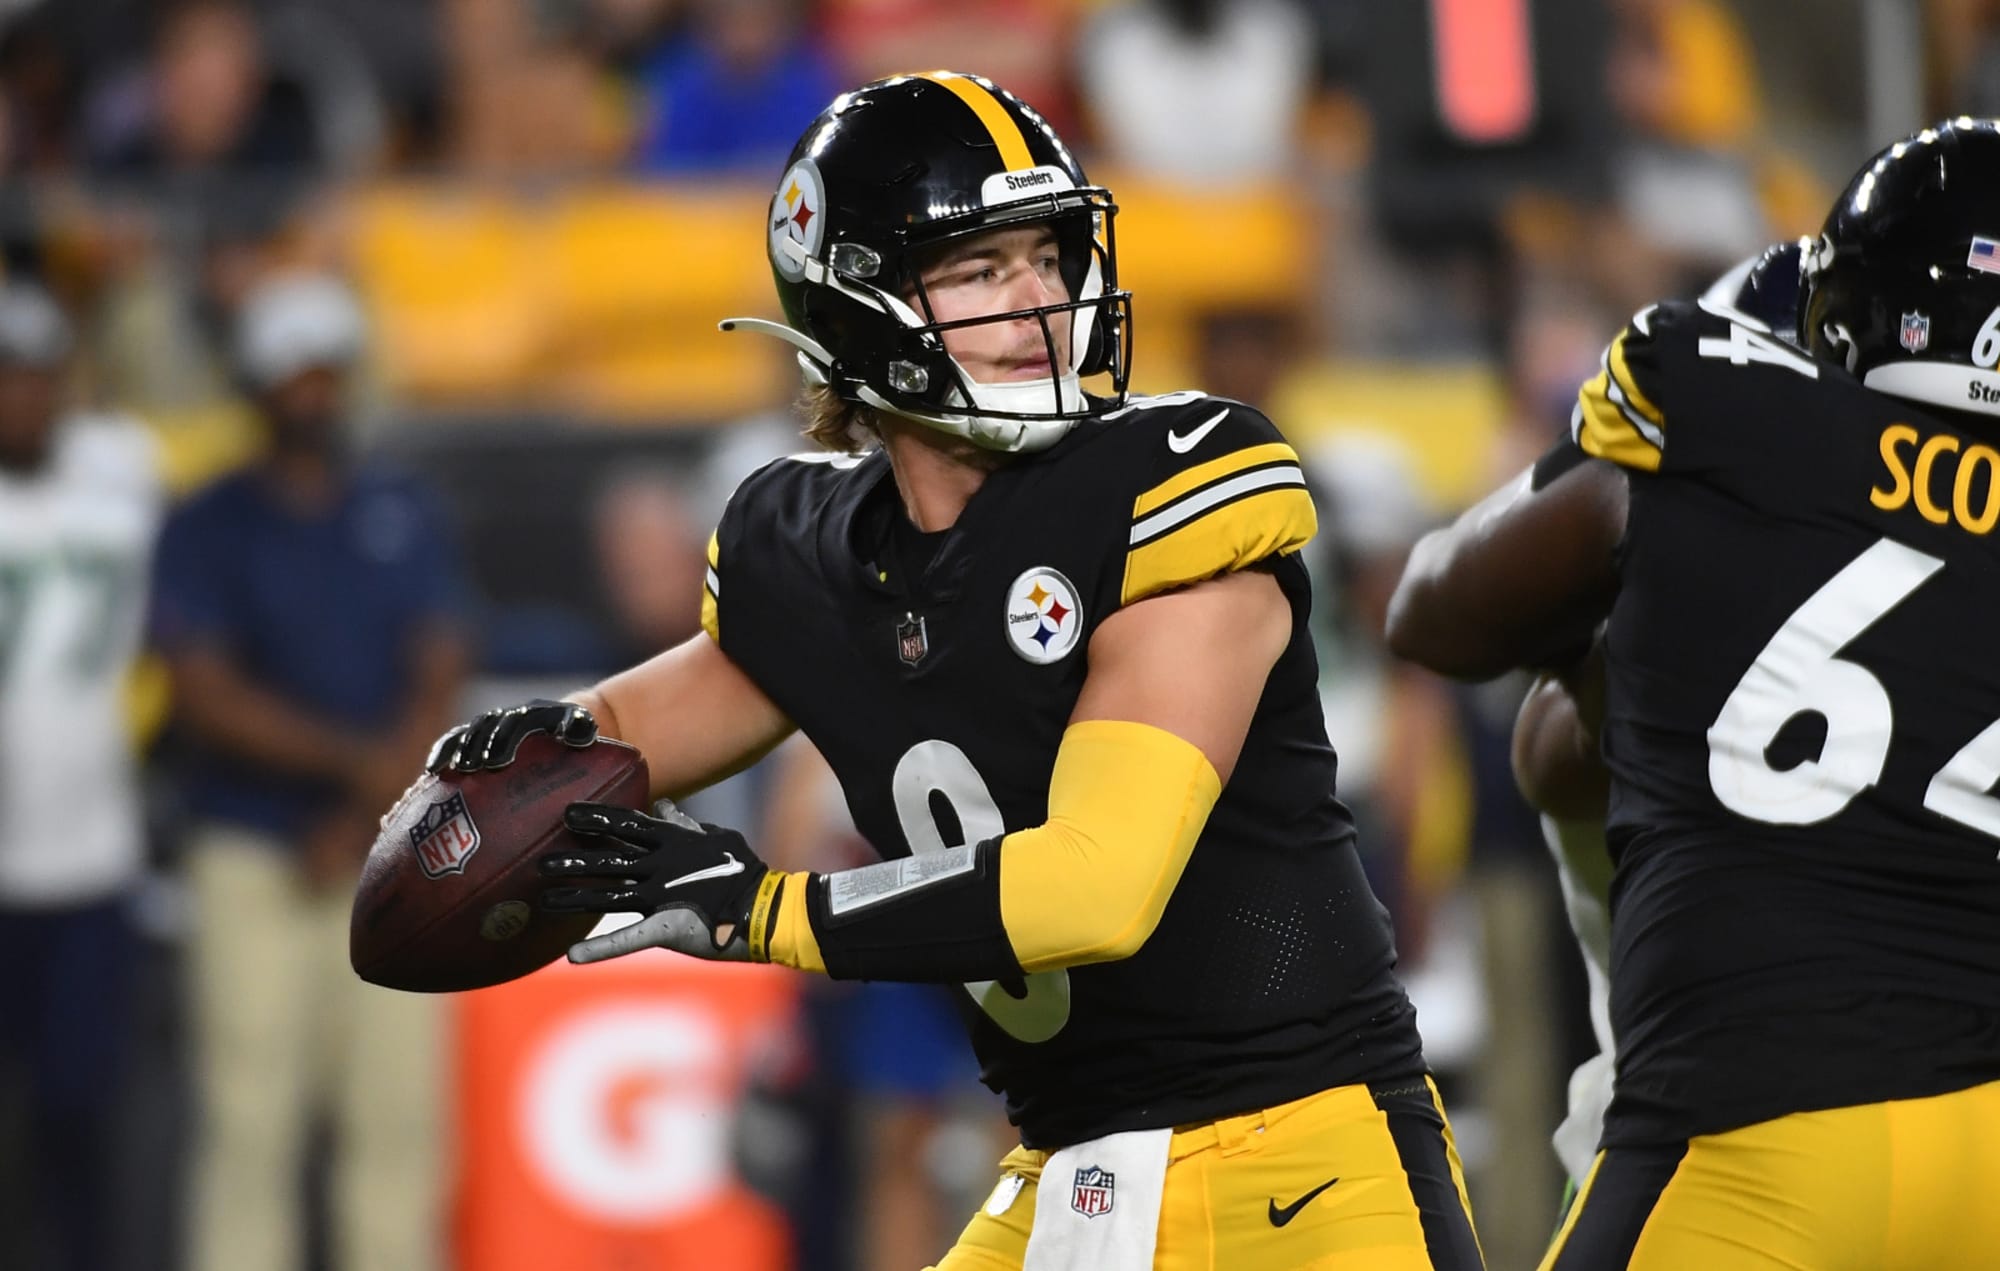 Why Steelers coach Mike Tomlin won’t play Kenny Pickett, explained